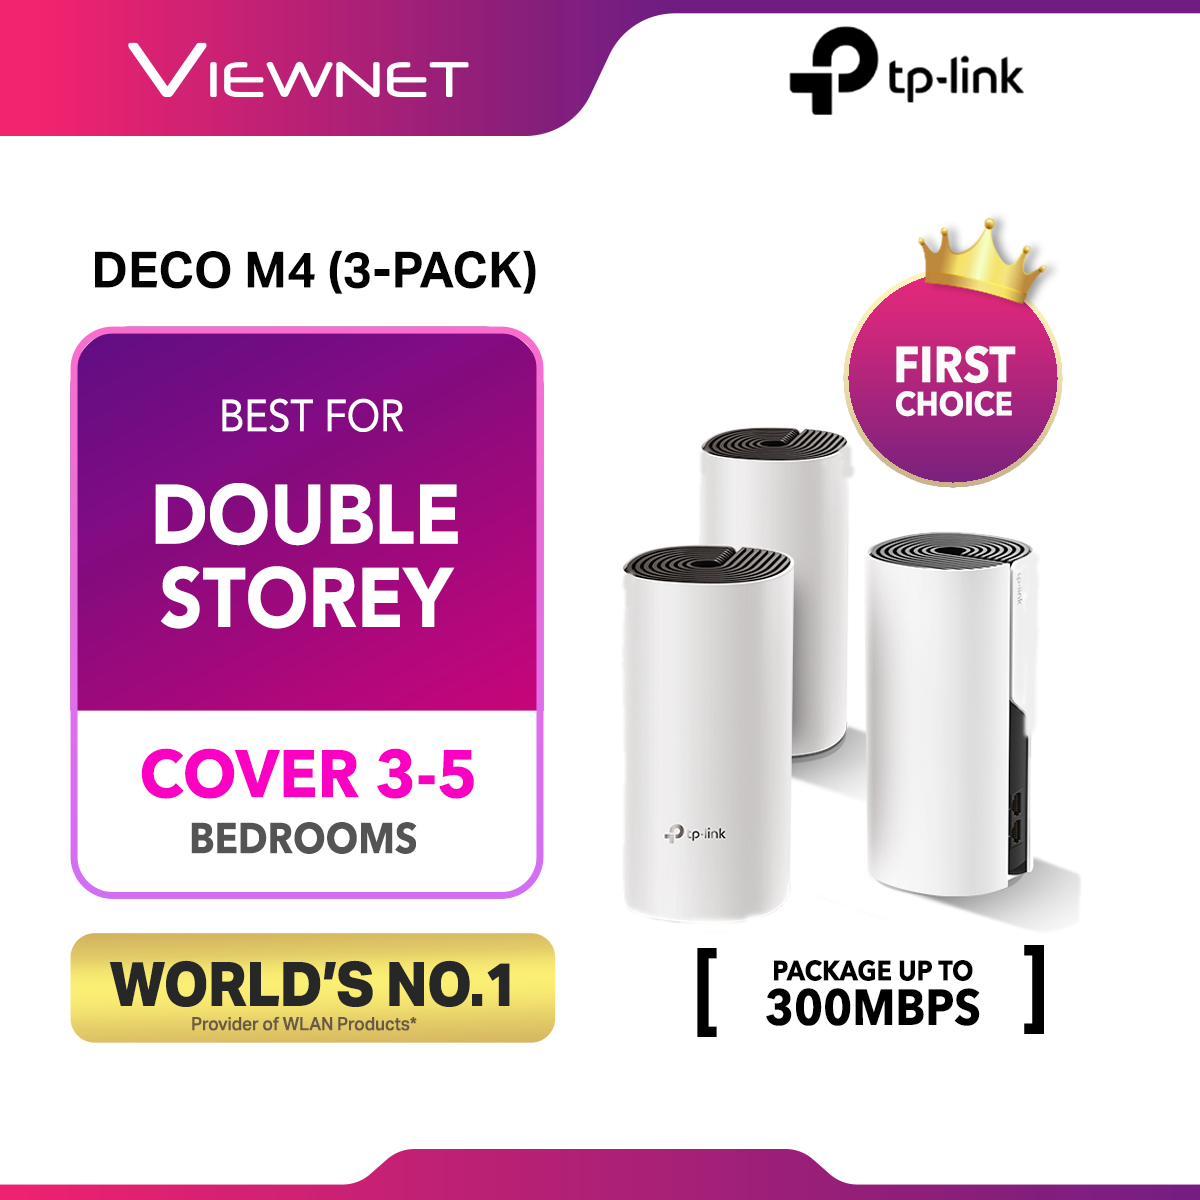 TP-LINK Deco M4 (3PACK) - AC1200 Gigabit Whole Home Mesh WiFi Wireless Router Wi-Fi System